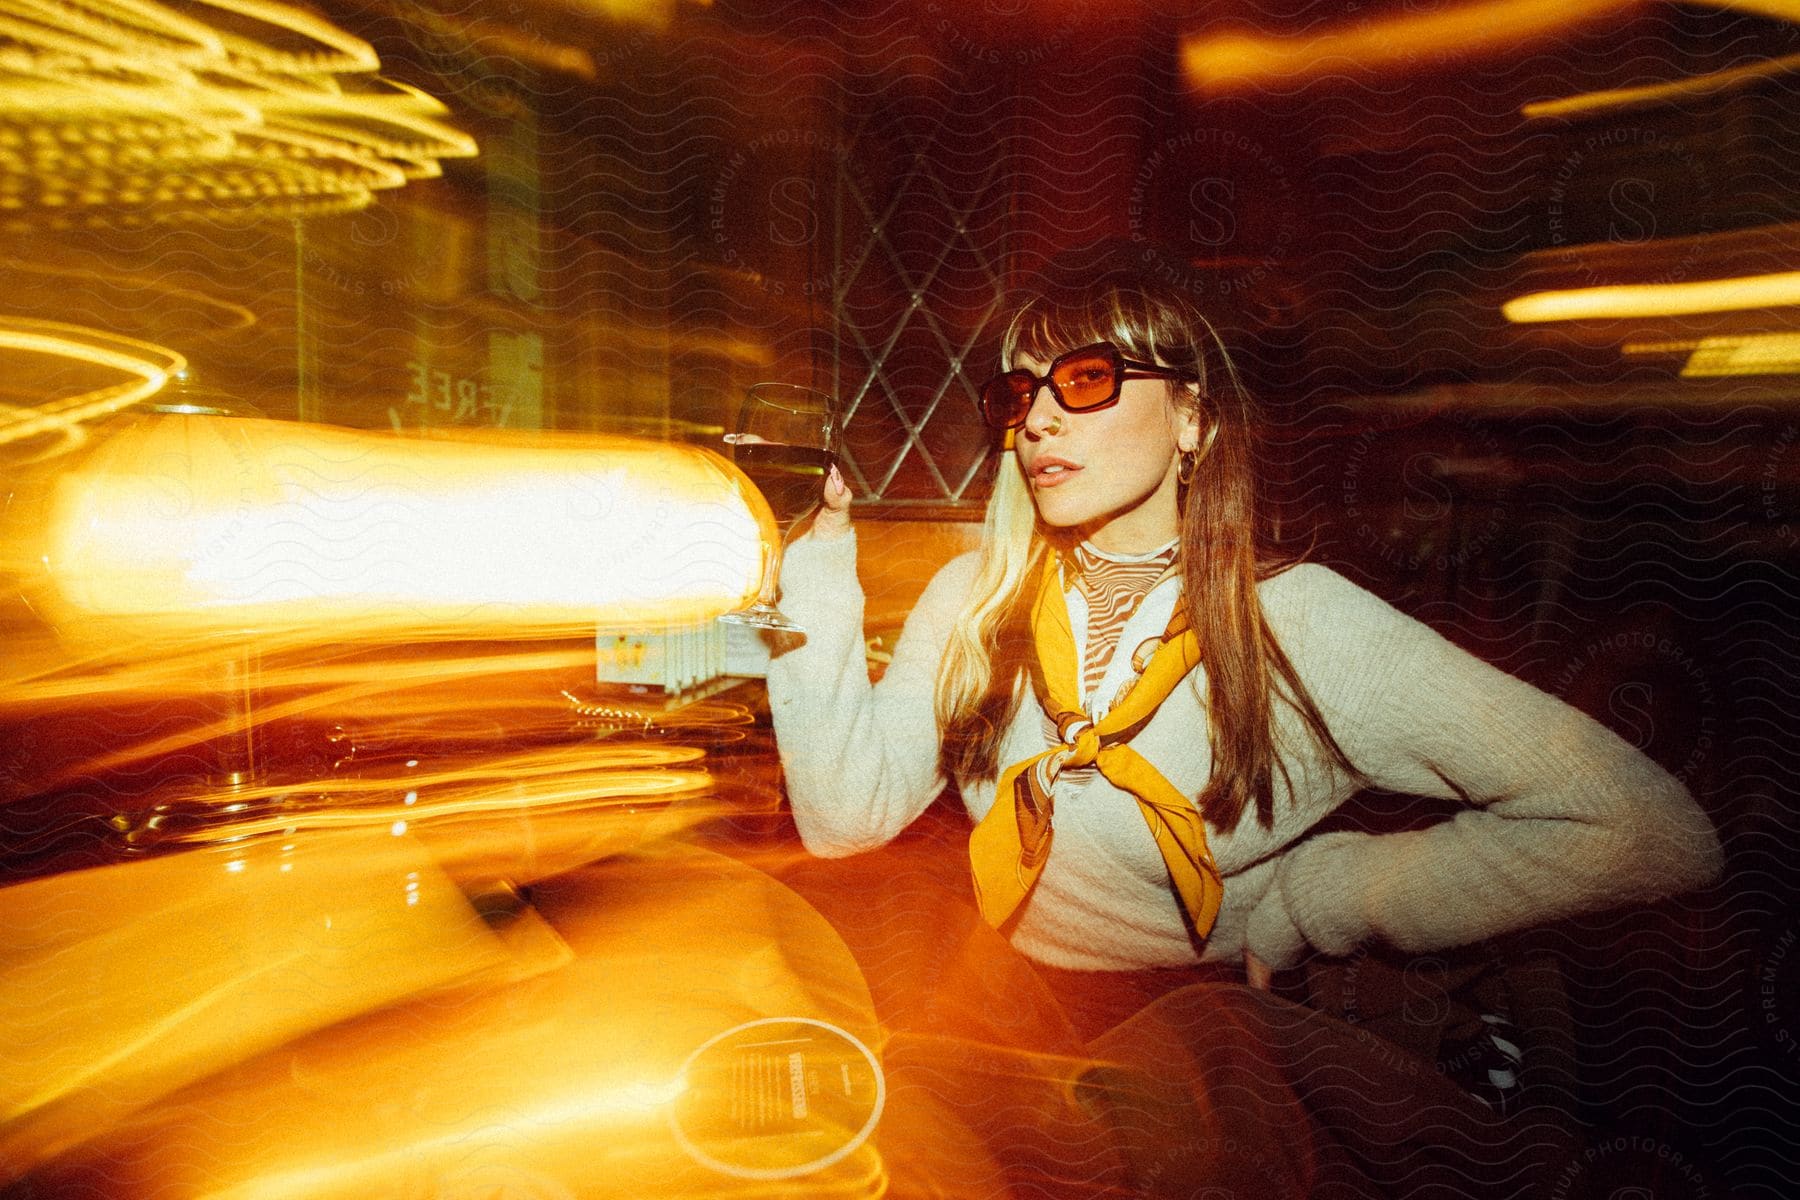 Woman holding a drink and wearing sunglasses in a dimly lit environment